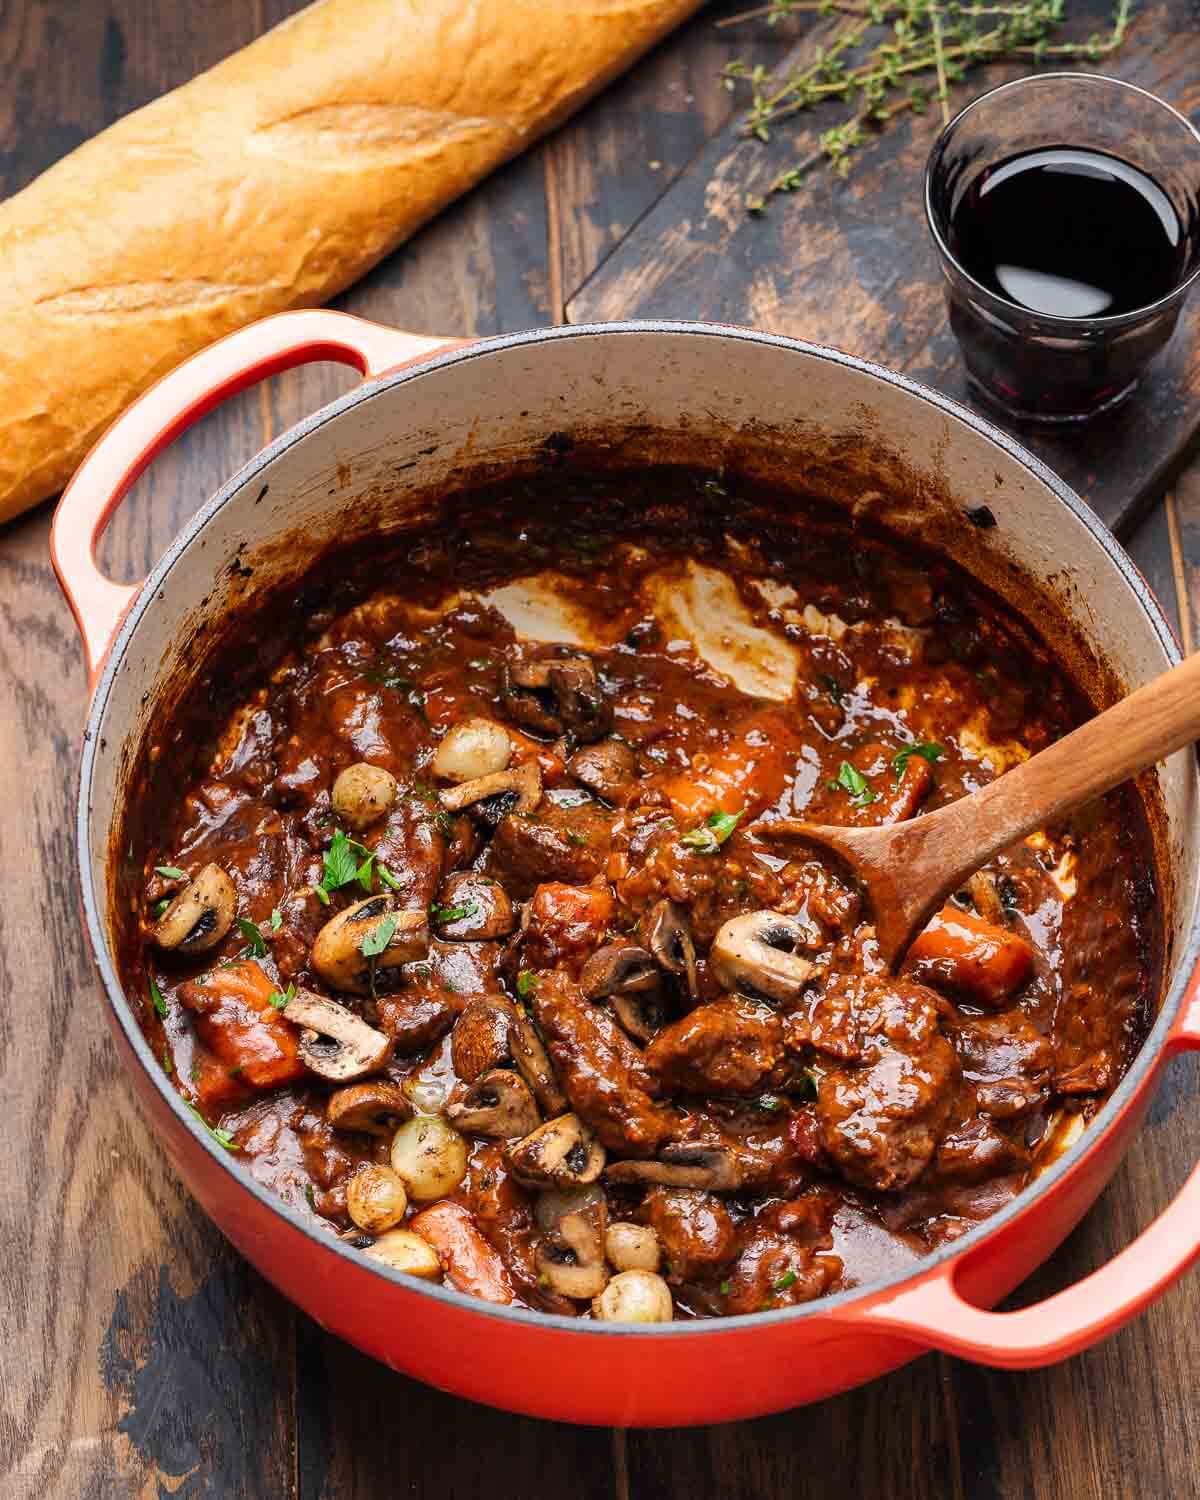 Beef Bourguignon in Dutch oven with baguette and glass of red wine.